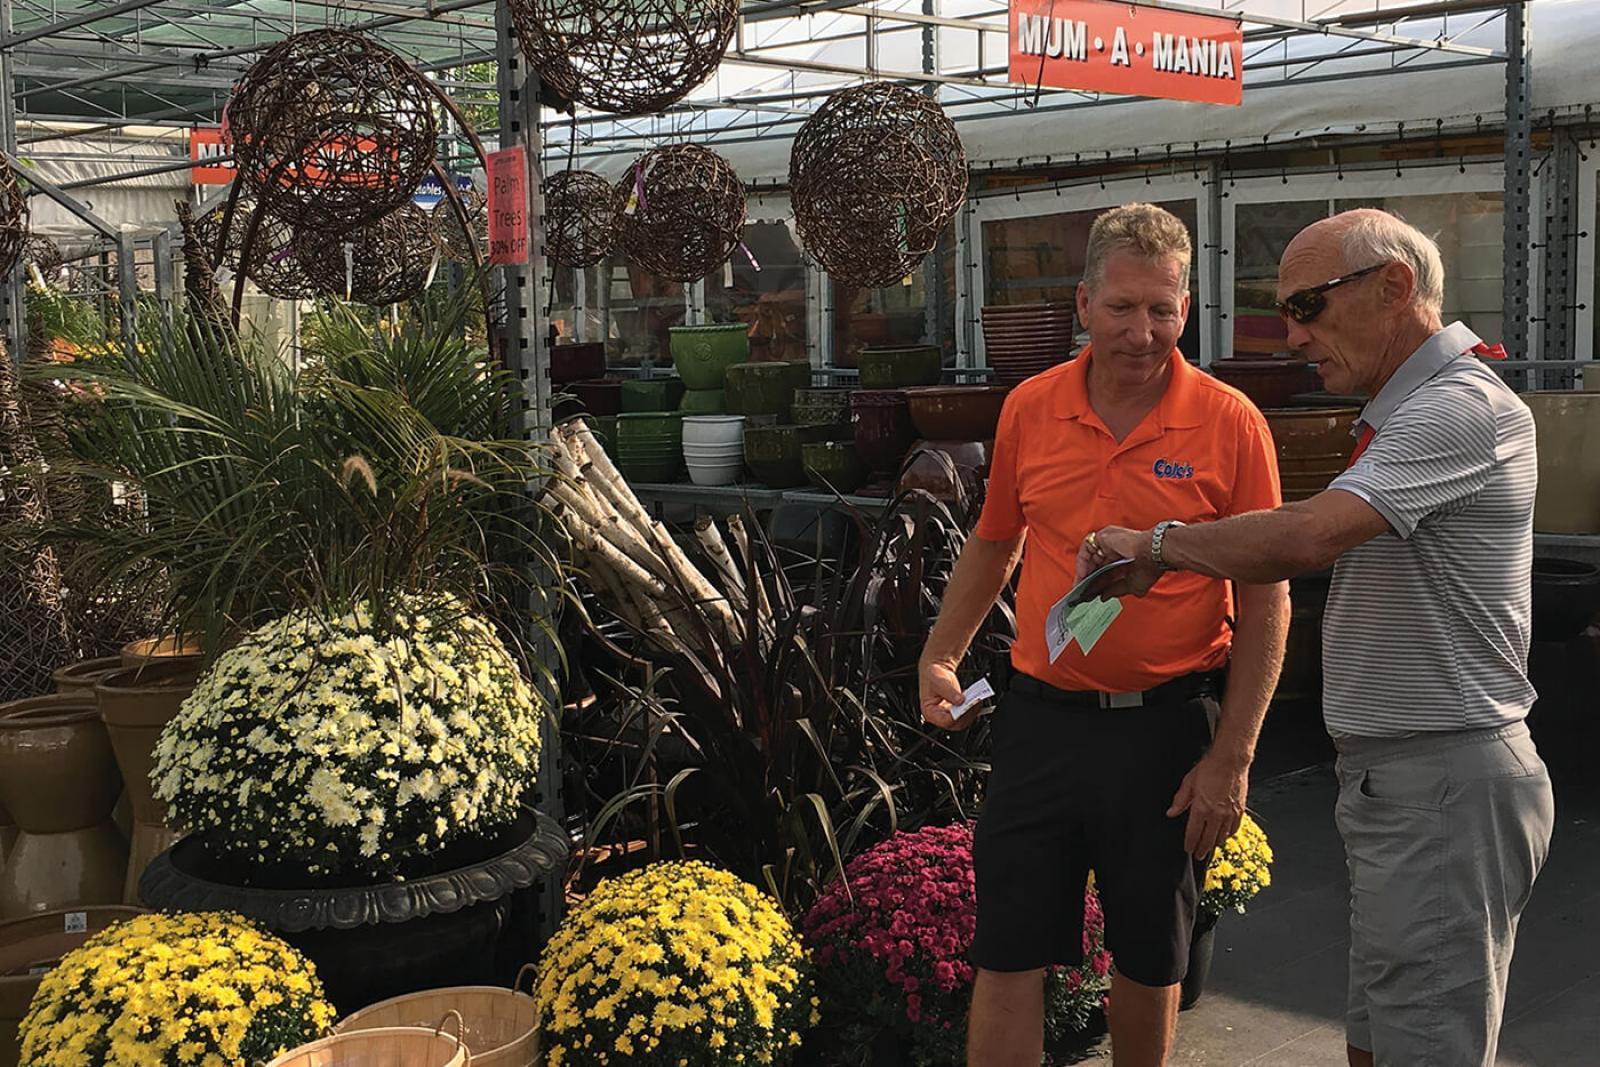 Garden centre tours are part of the two-day event.